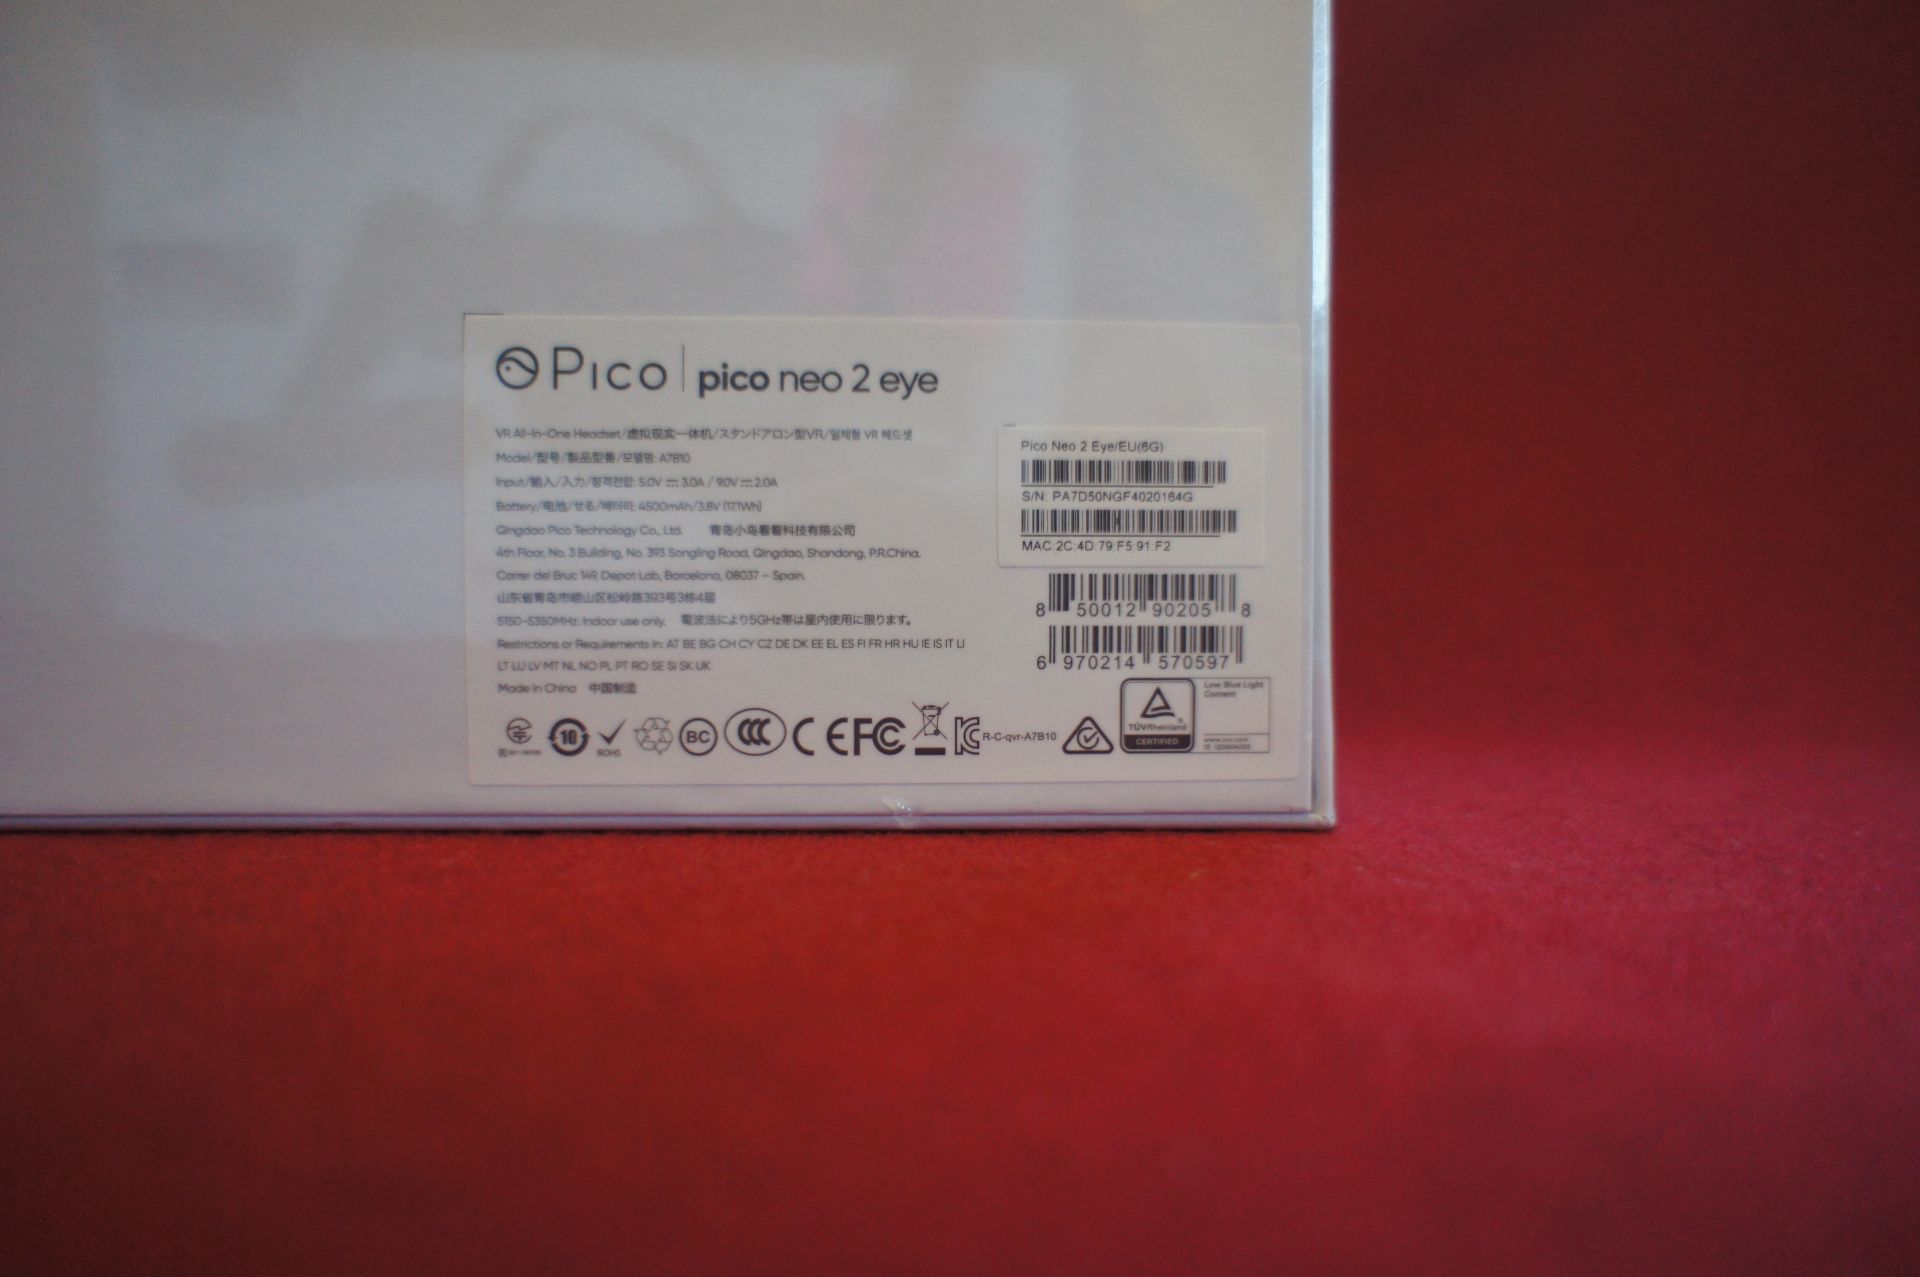 Pico Neo 2 EYE VR headset, Asset Number H1, S/N PA - Image 2 of 3